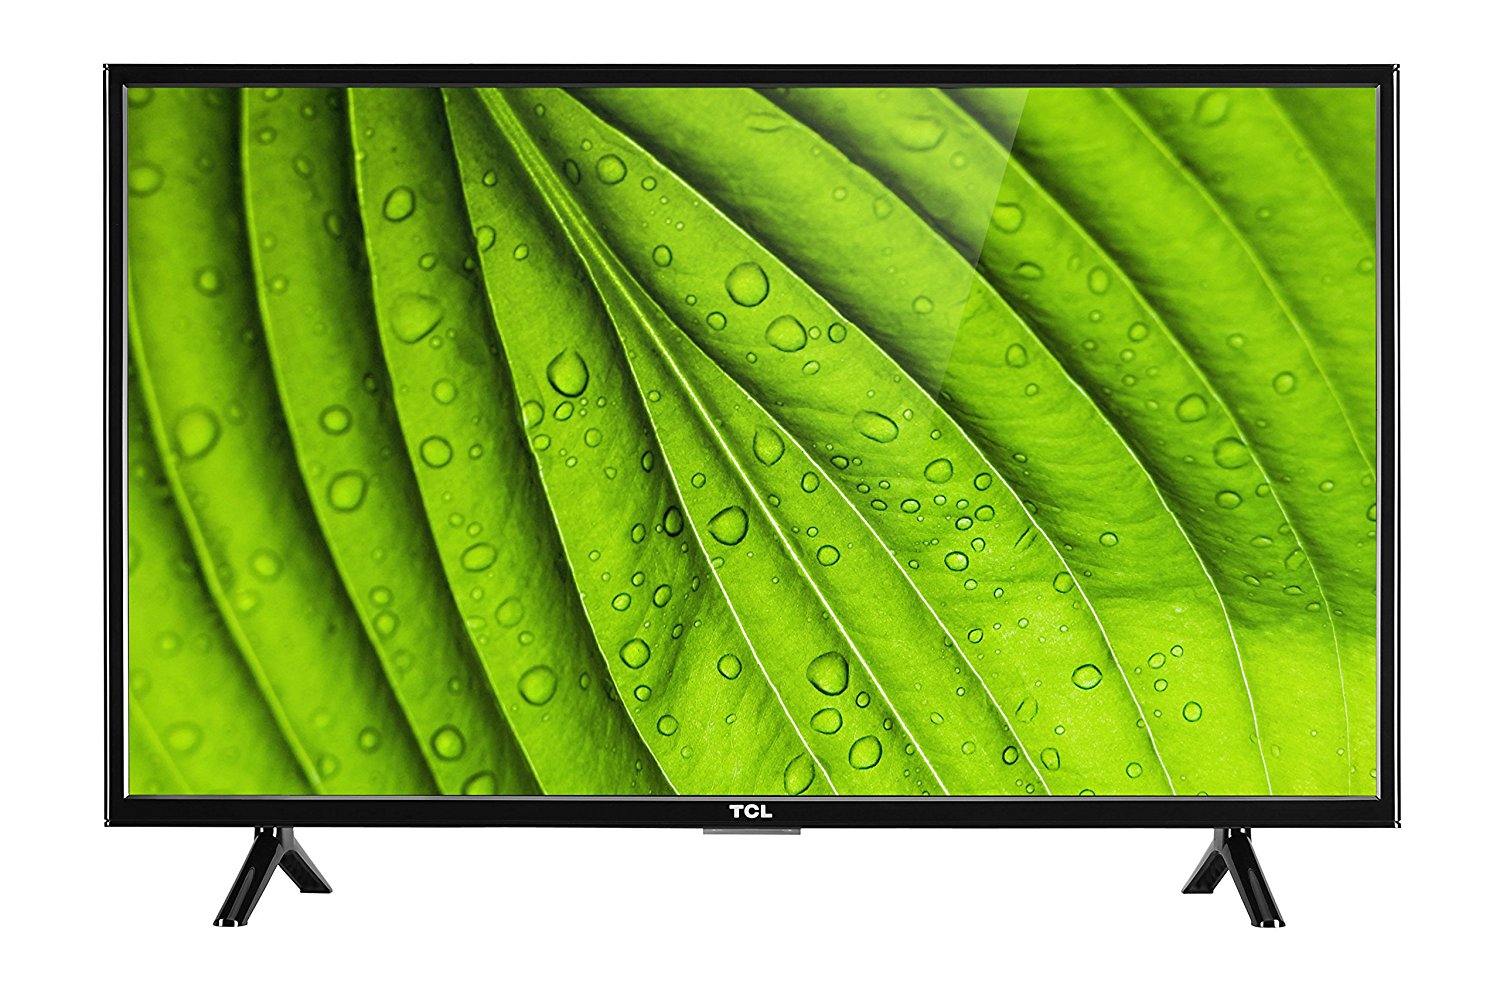 An image of TCL 40D100 40-Inch FHD LED TV